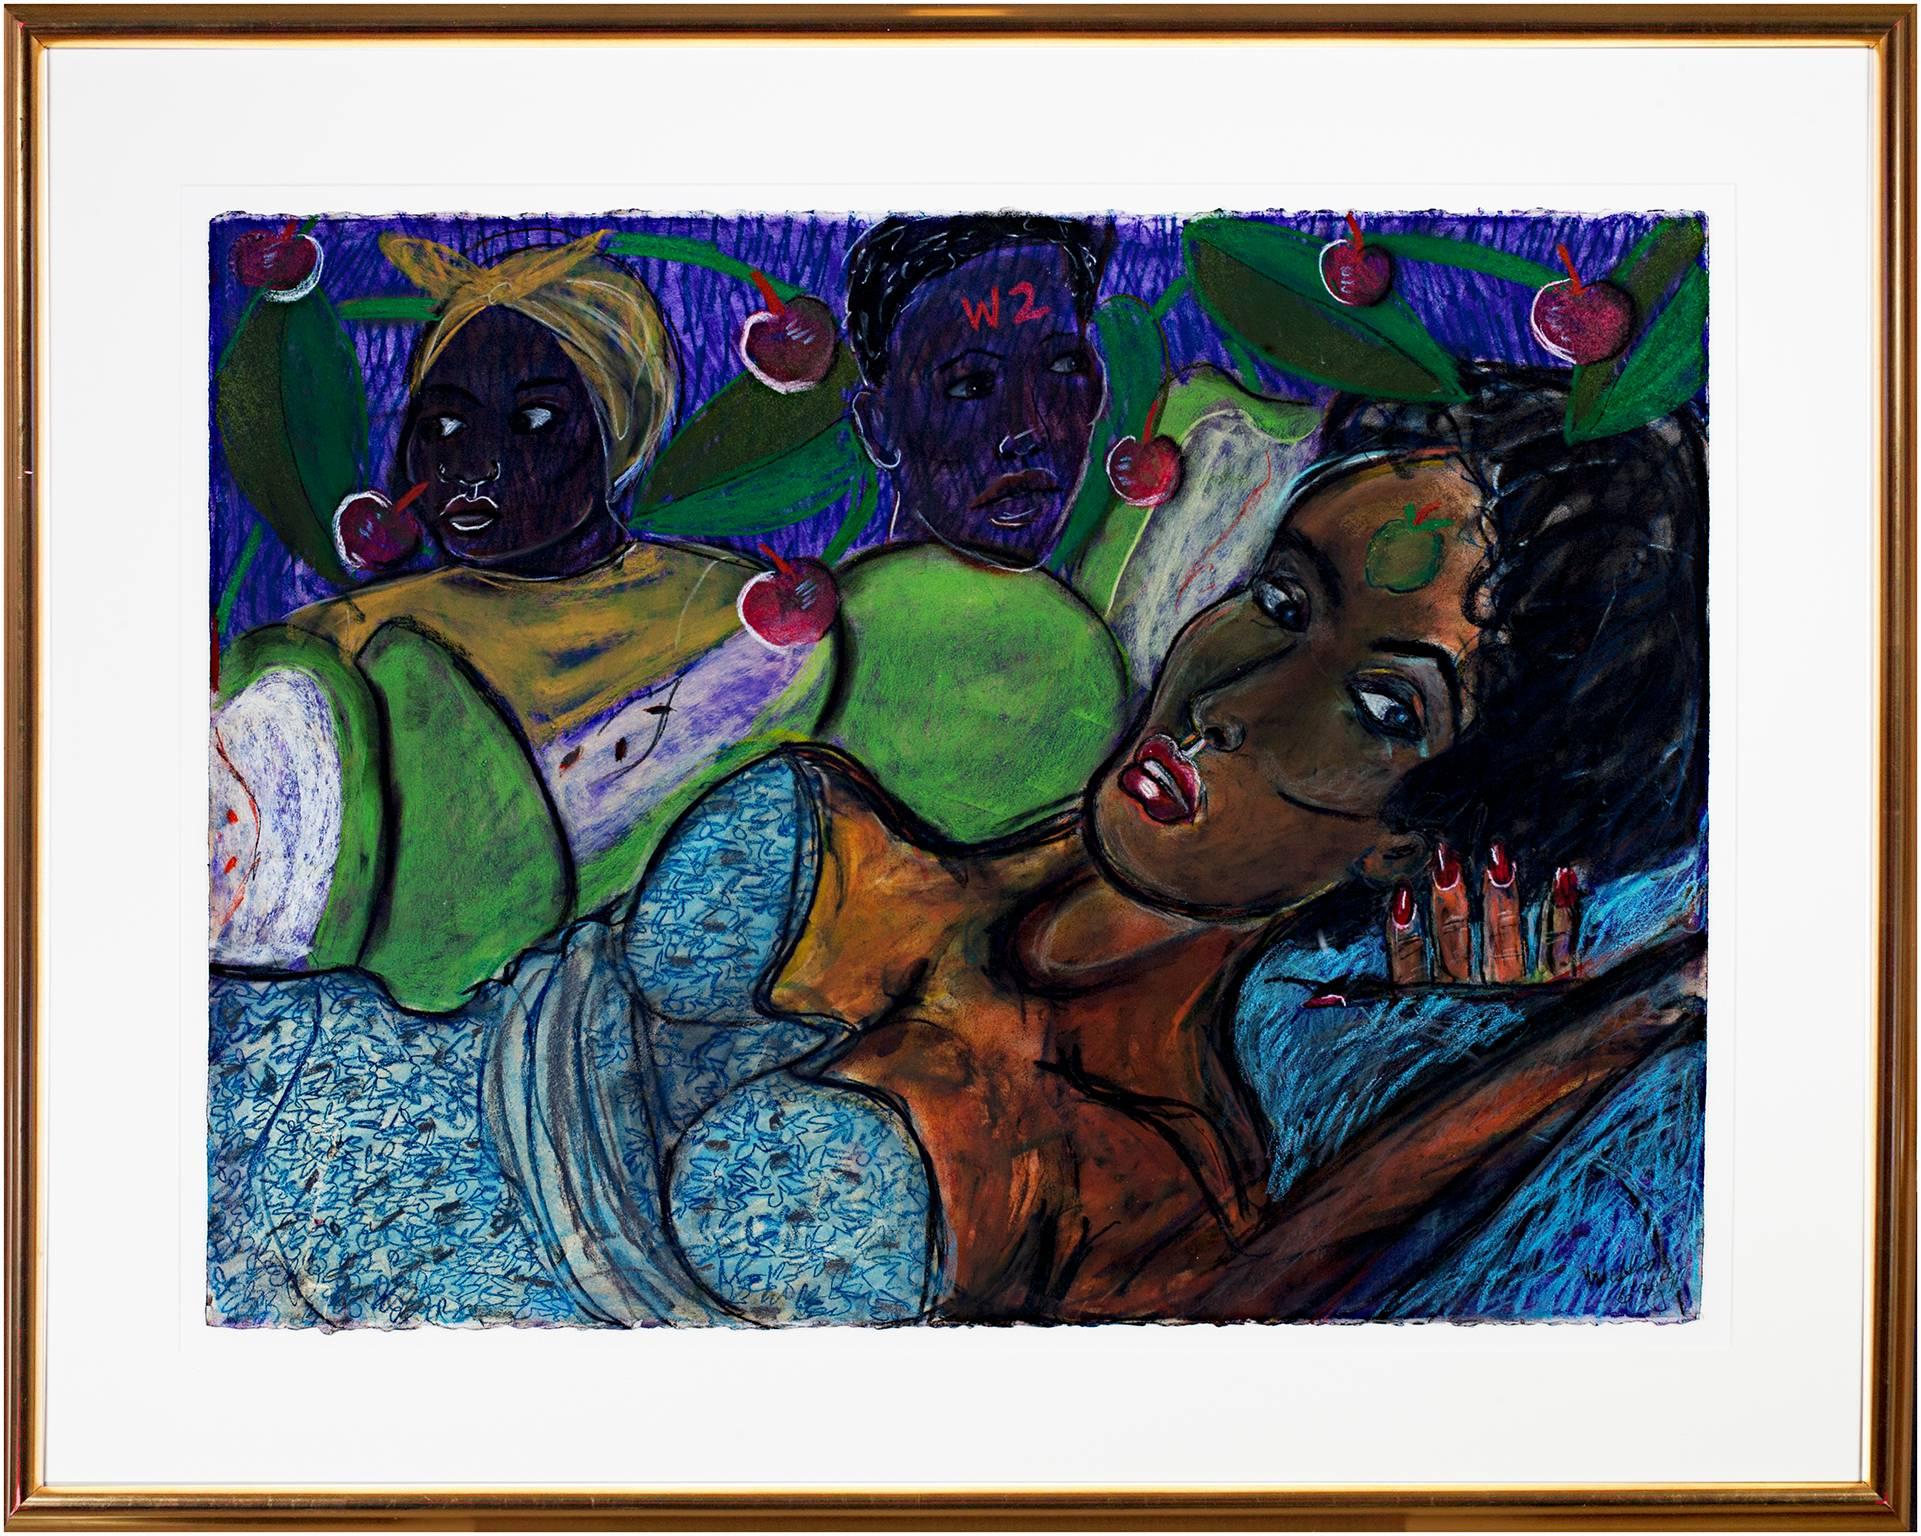 "America's Nightmares" is an original pastel drawing on paper by Della Wells. The artist signed the piece in the lower right. The work depicts three African American figures in an indeterminate garden-like space surrounded by apples upon which are